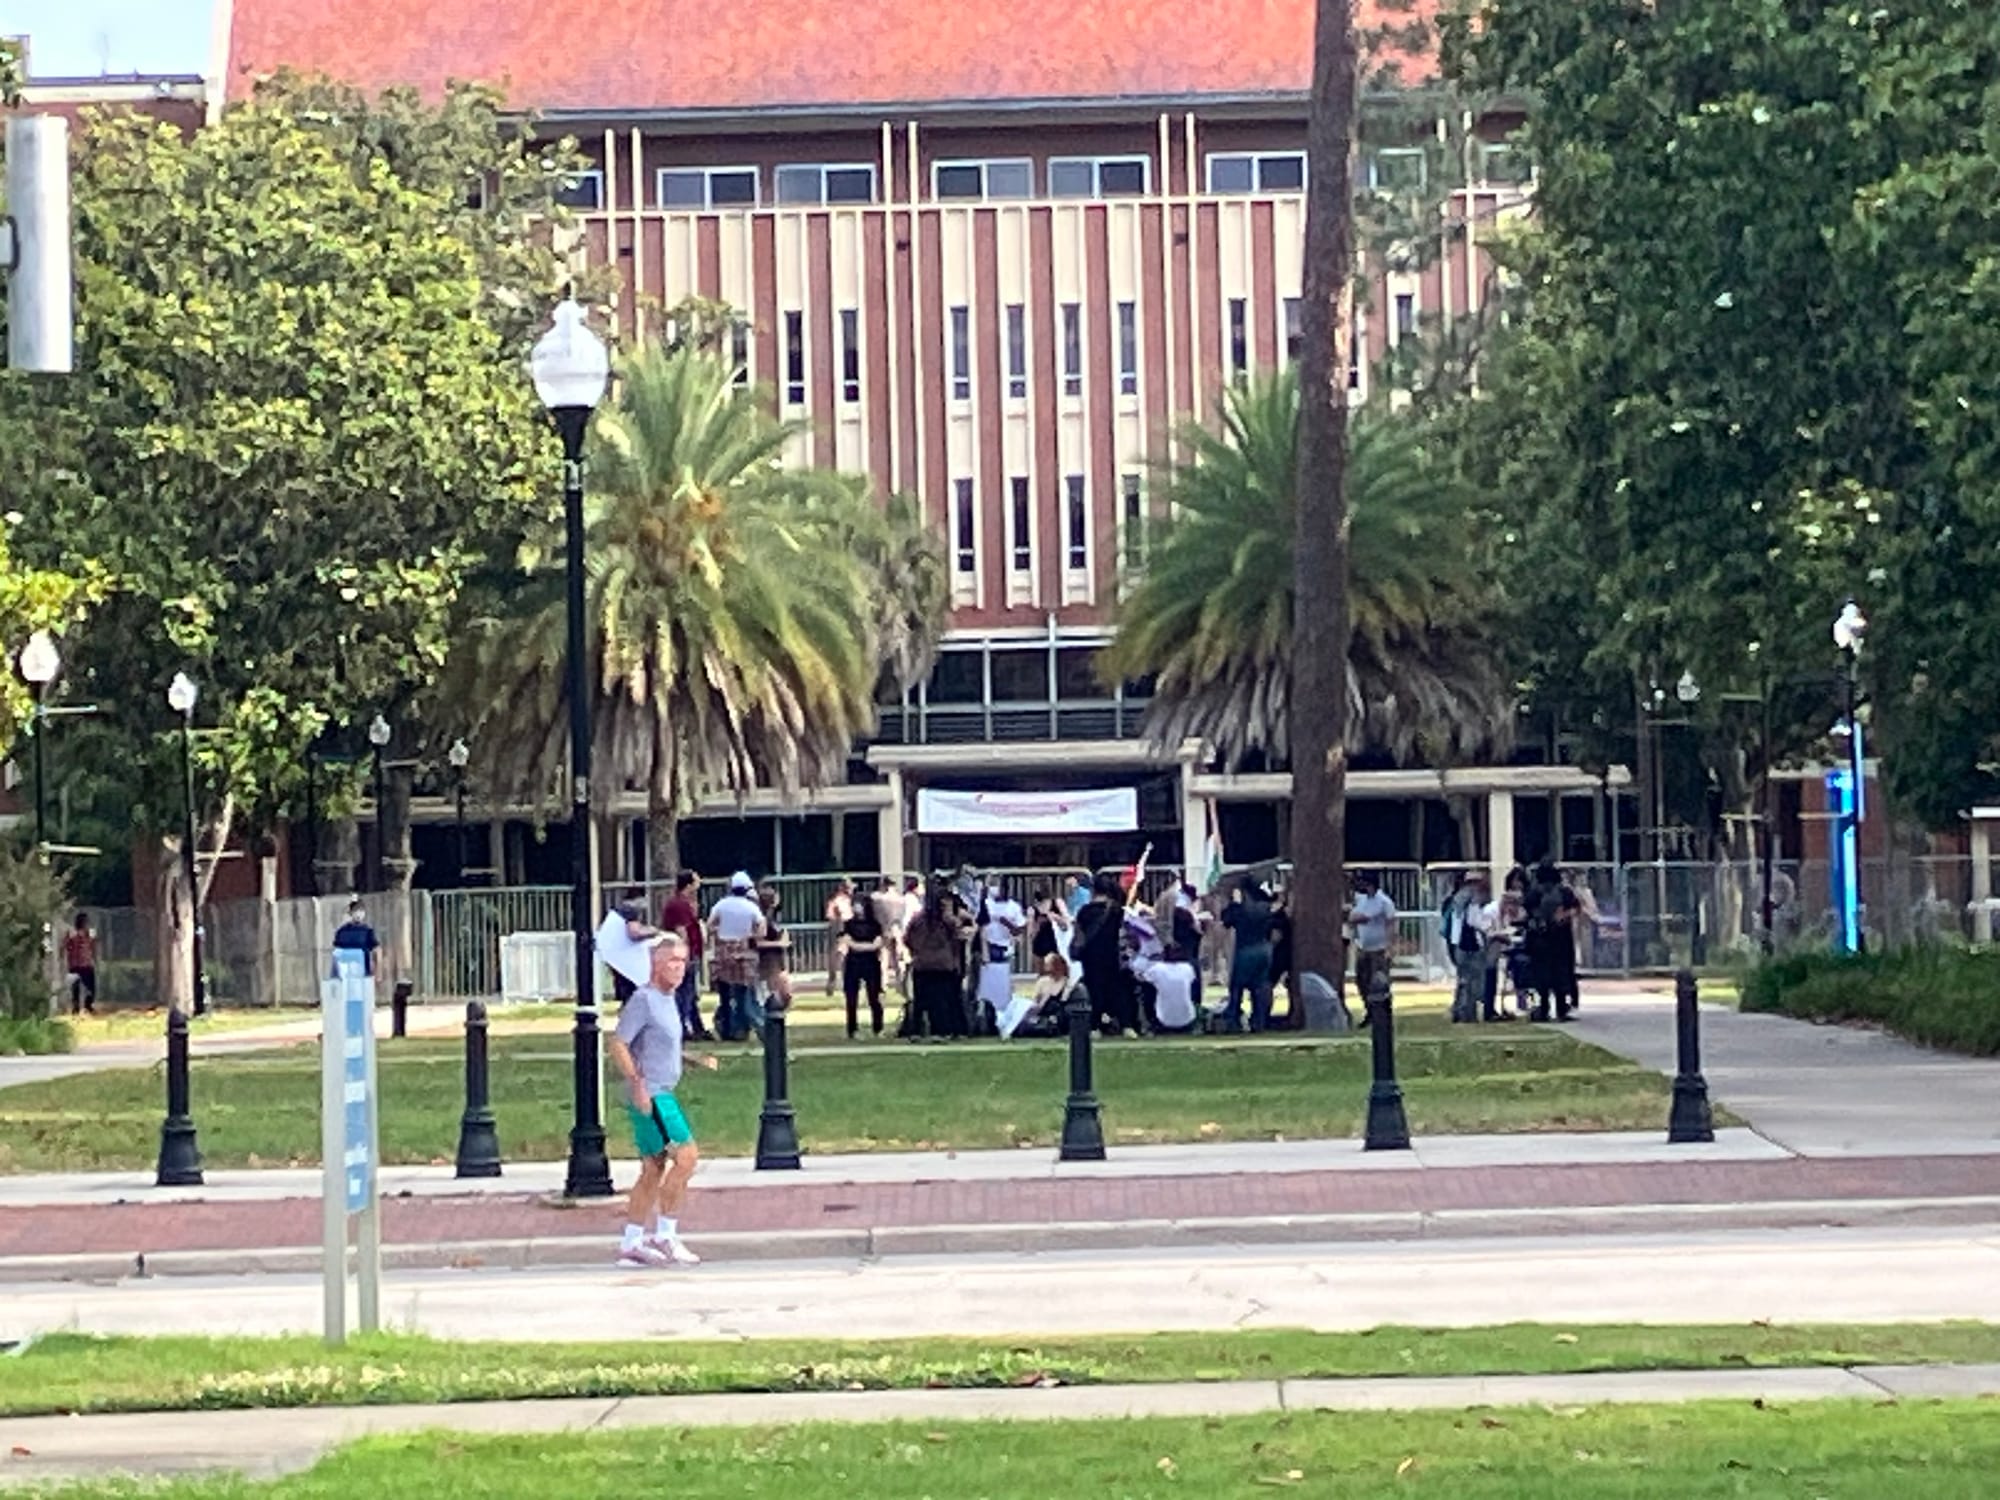 Press Conference For Gov. DeSantis Being Set Up in Front of Pro-Palestine Protesters